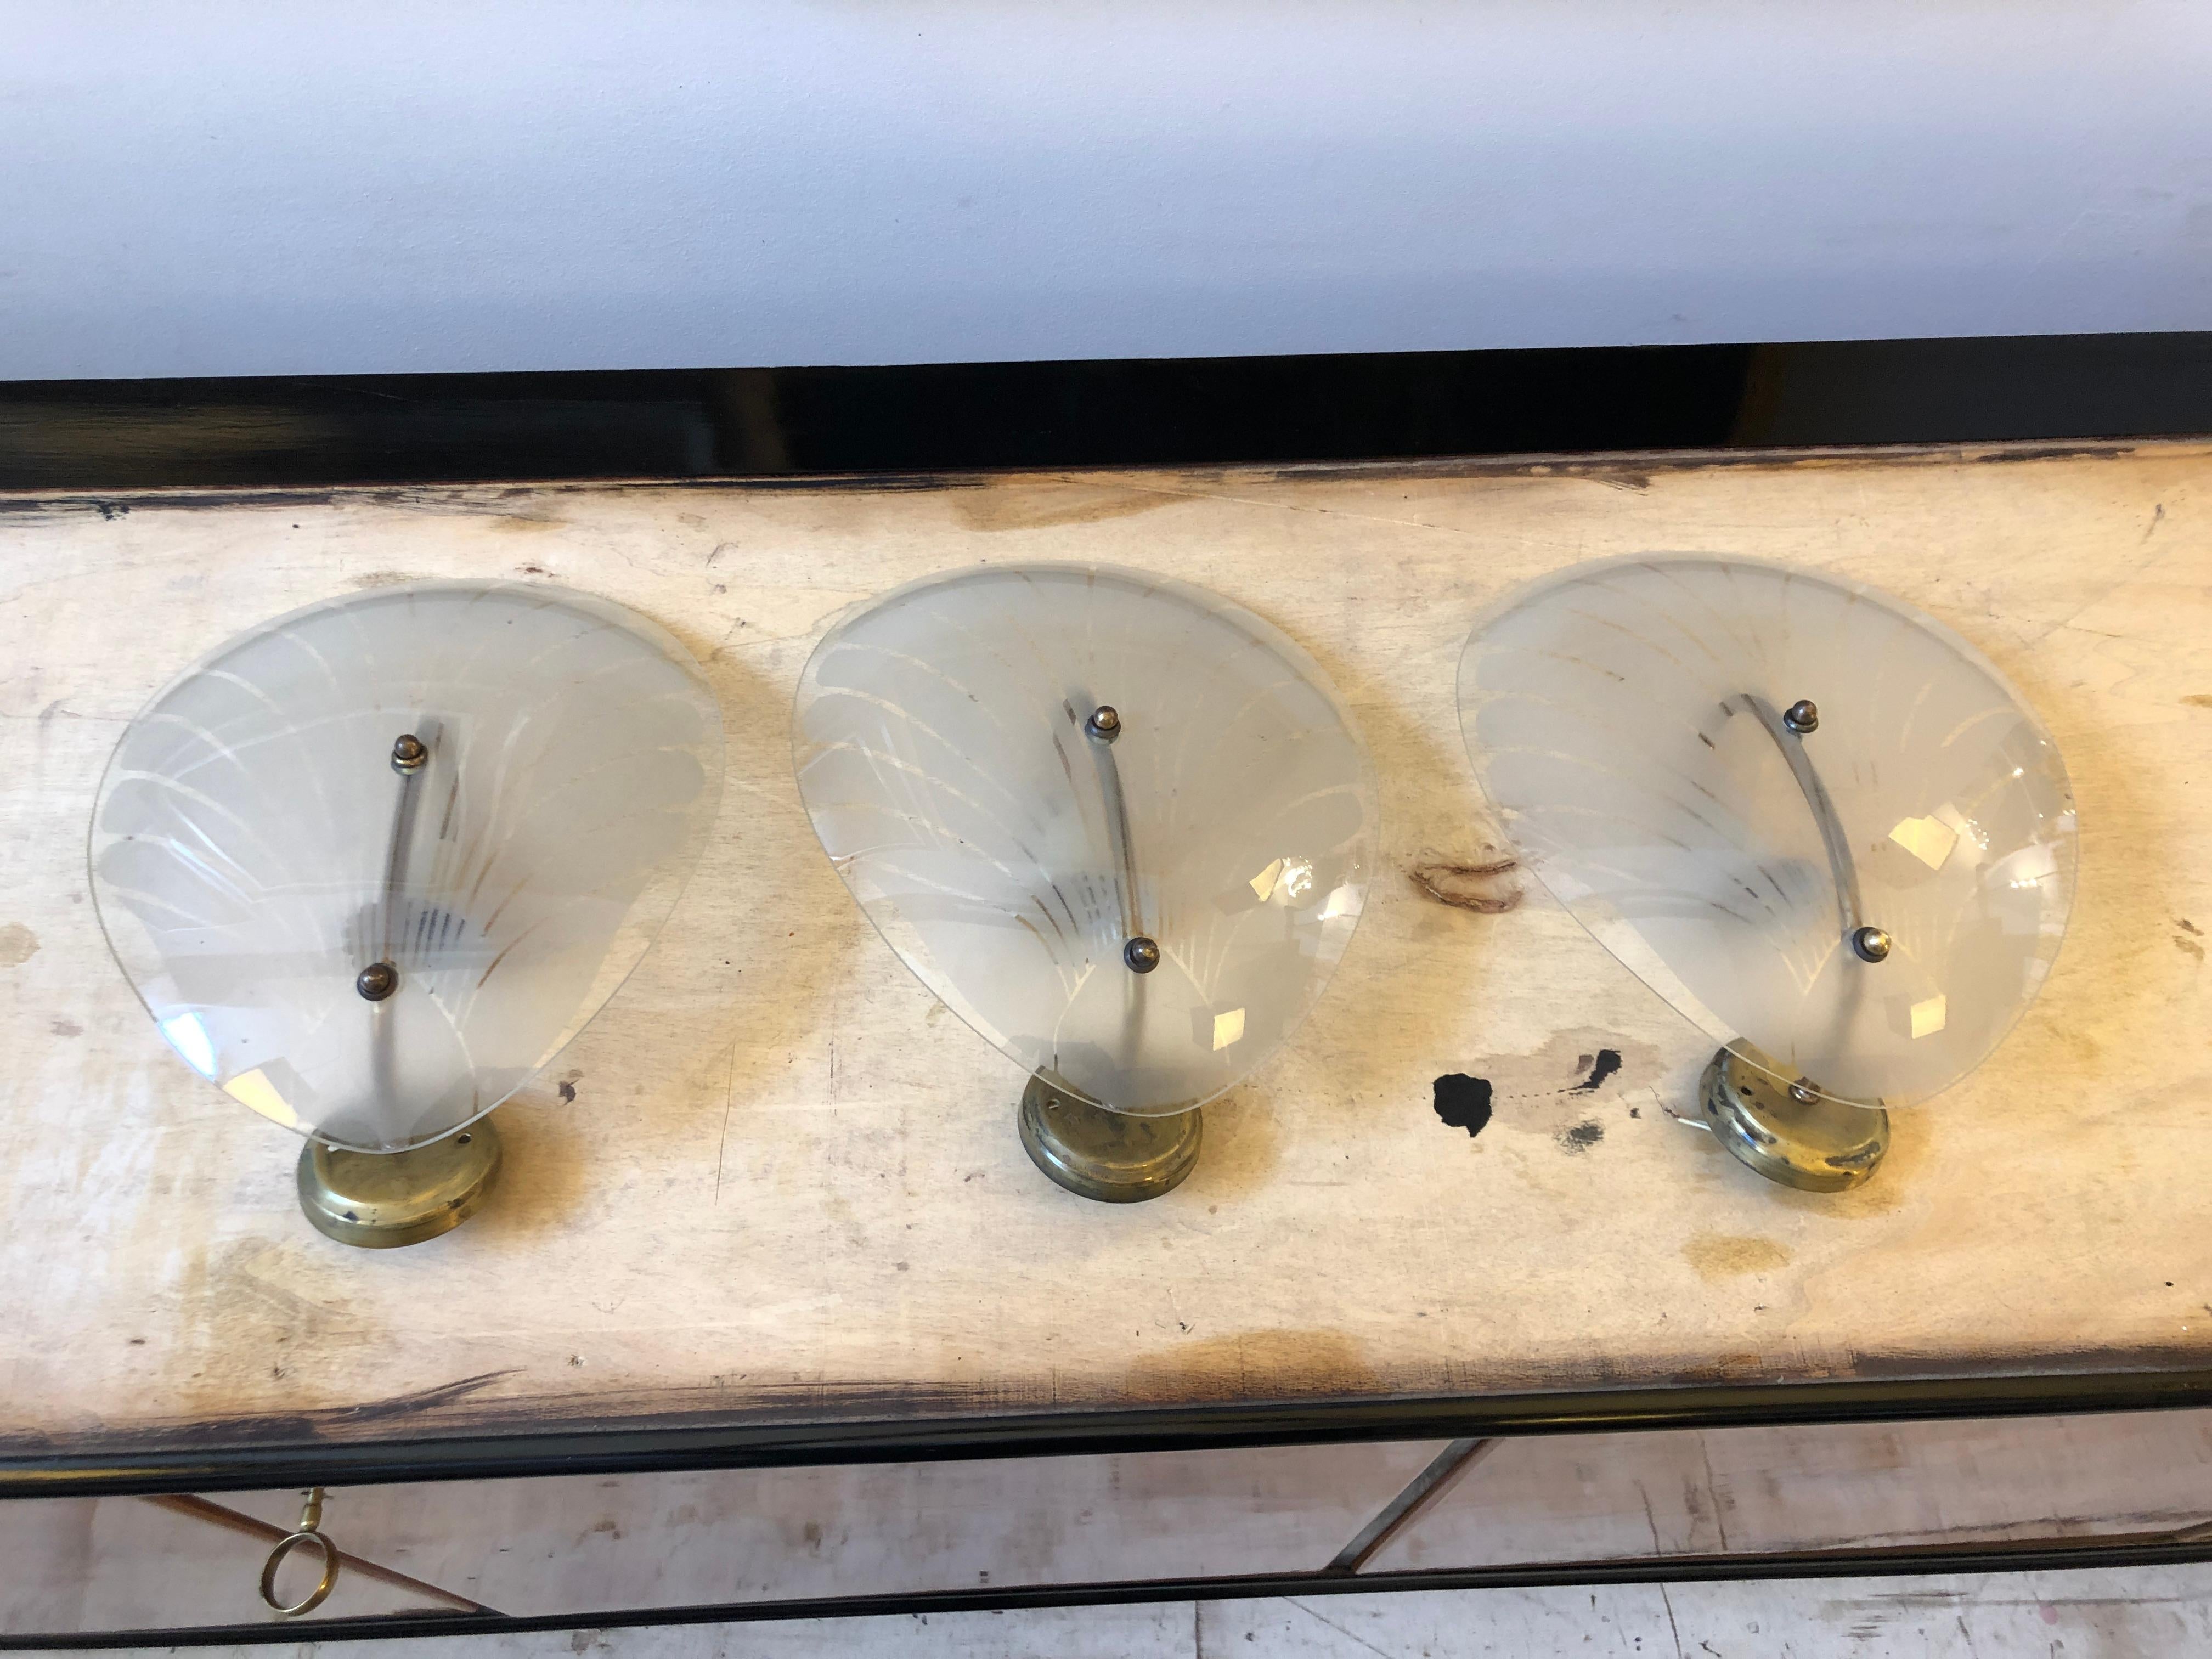 Three Art Deco wall sconces designed and manufactured in Italy in 1940 sold one by one. Glasses are in perfect conditions, brass it's in original patina. They work both 110-240 volts and need regular e14 bulbs. Art Deco design was prominent during